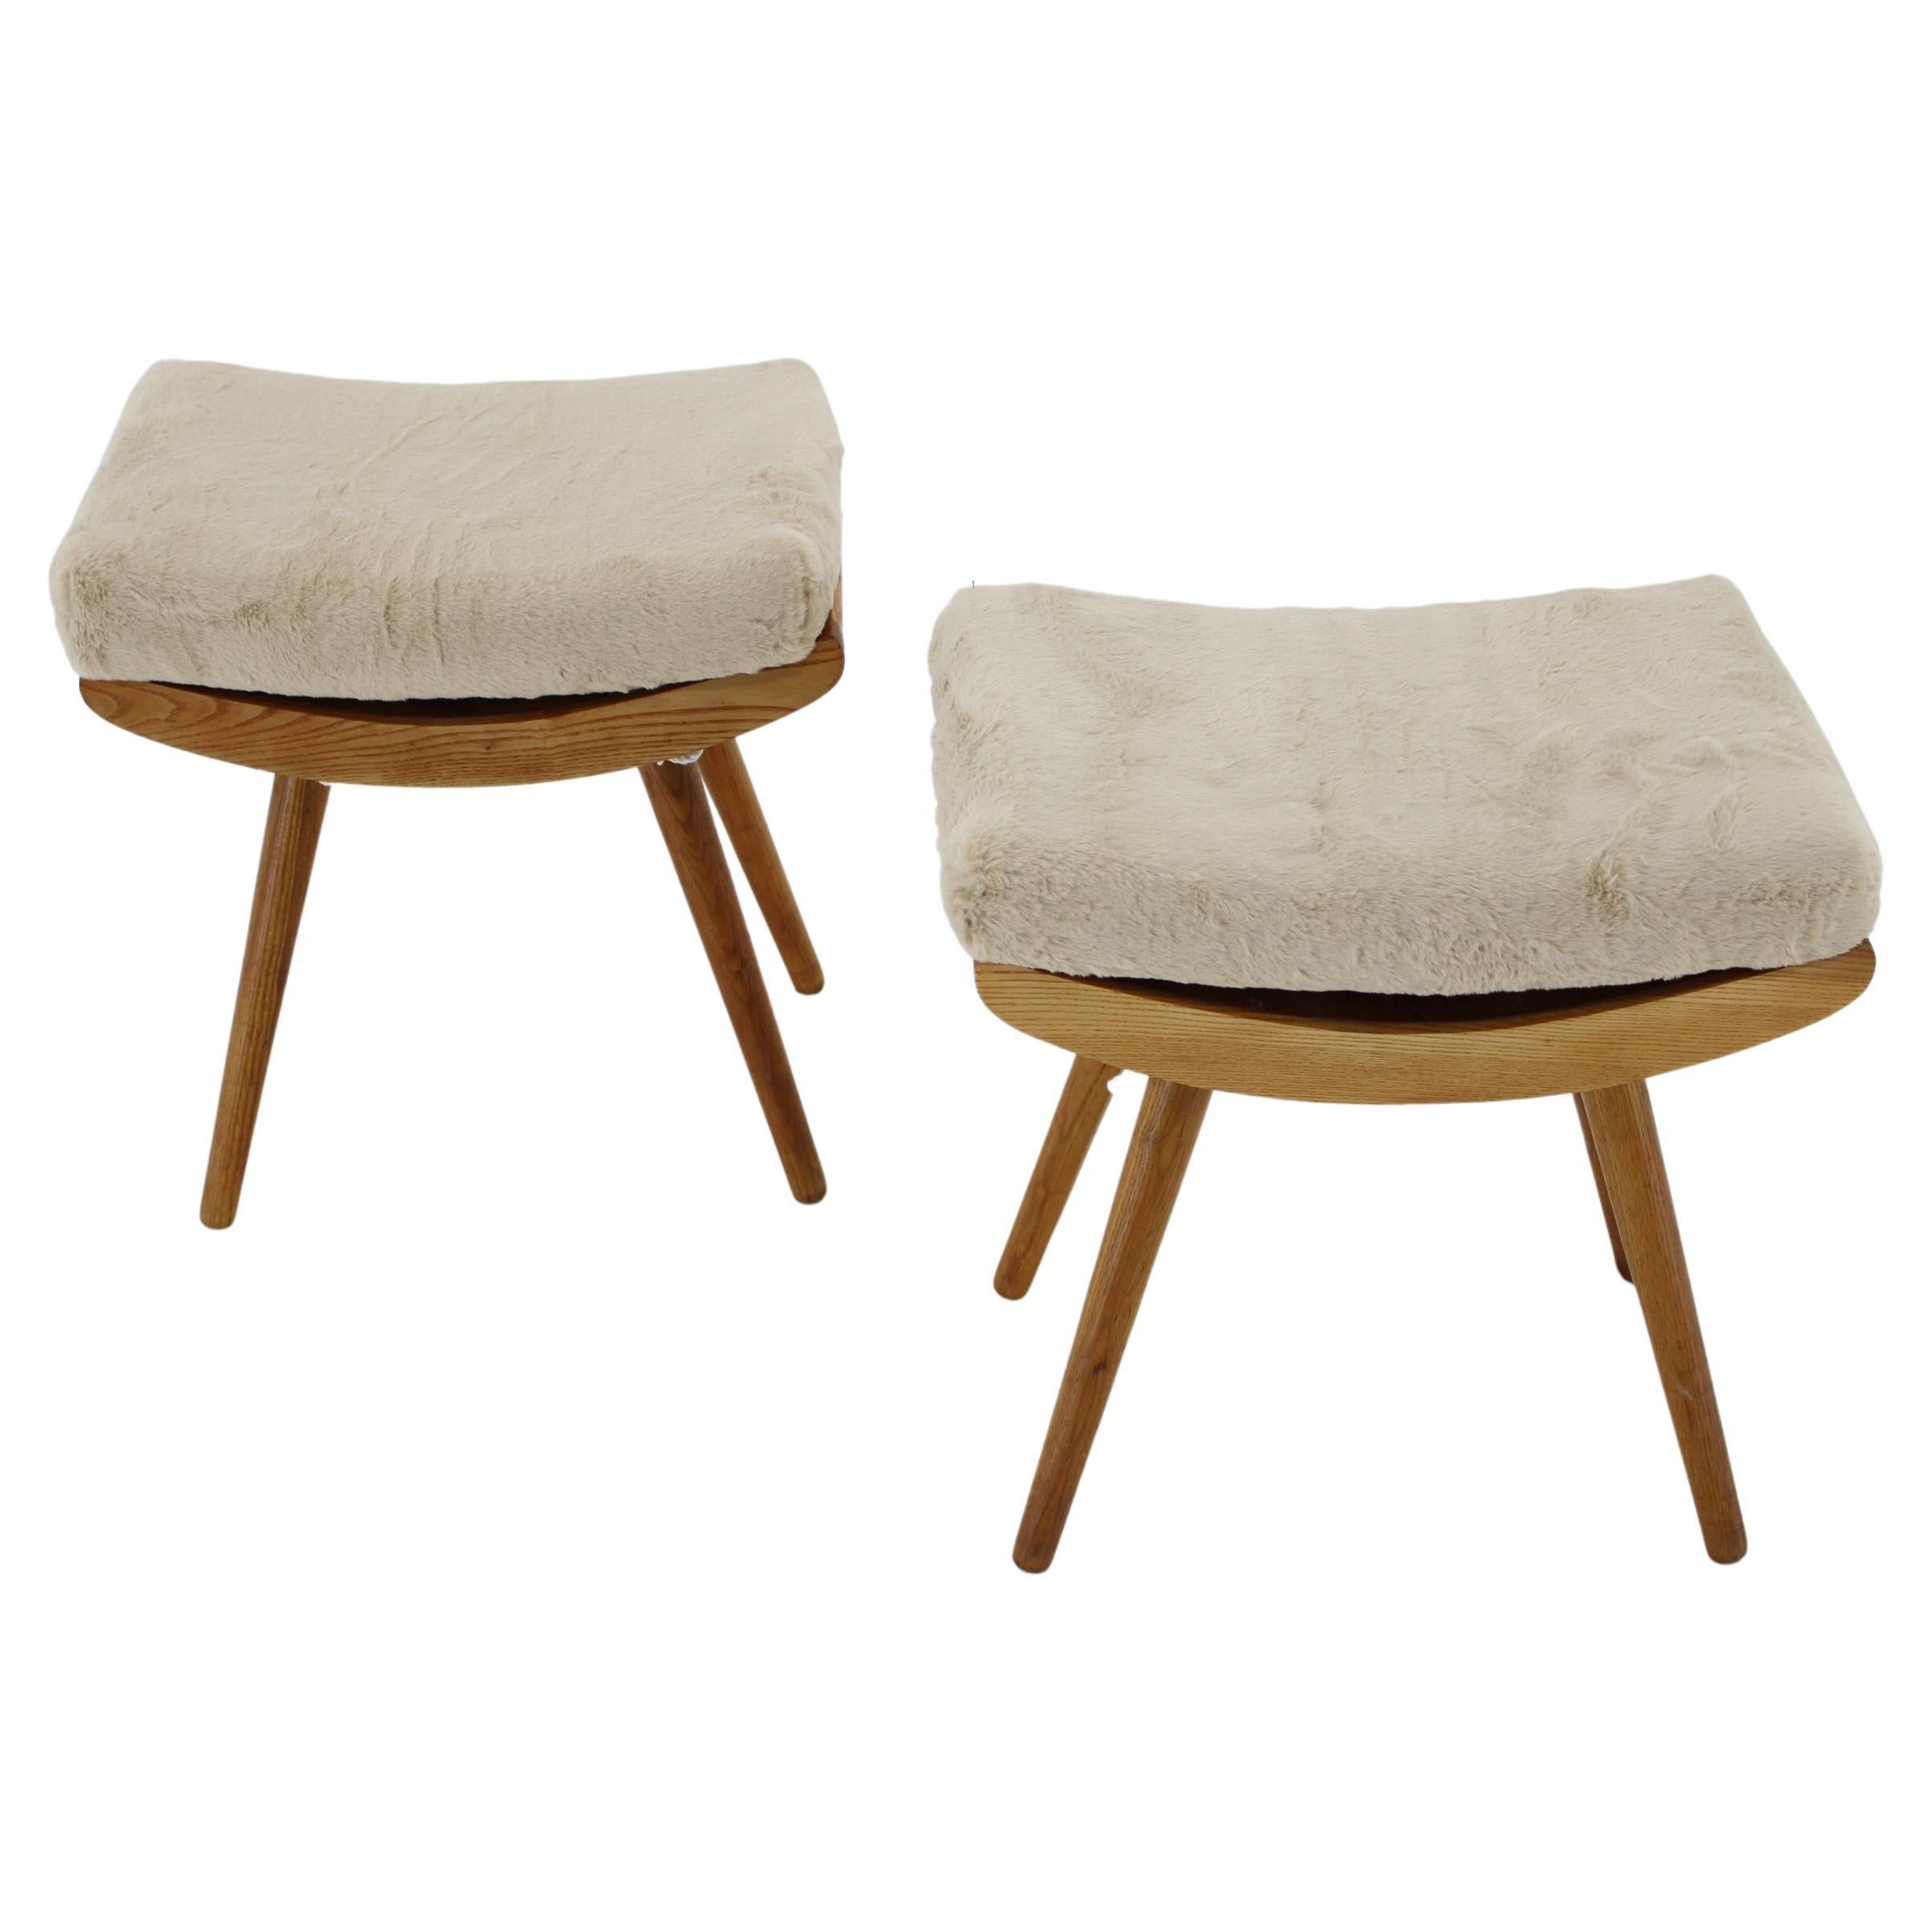 1960s Pair of Ash Stools, Czechoslovakia For Sale